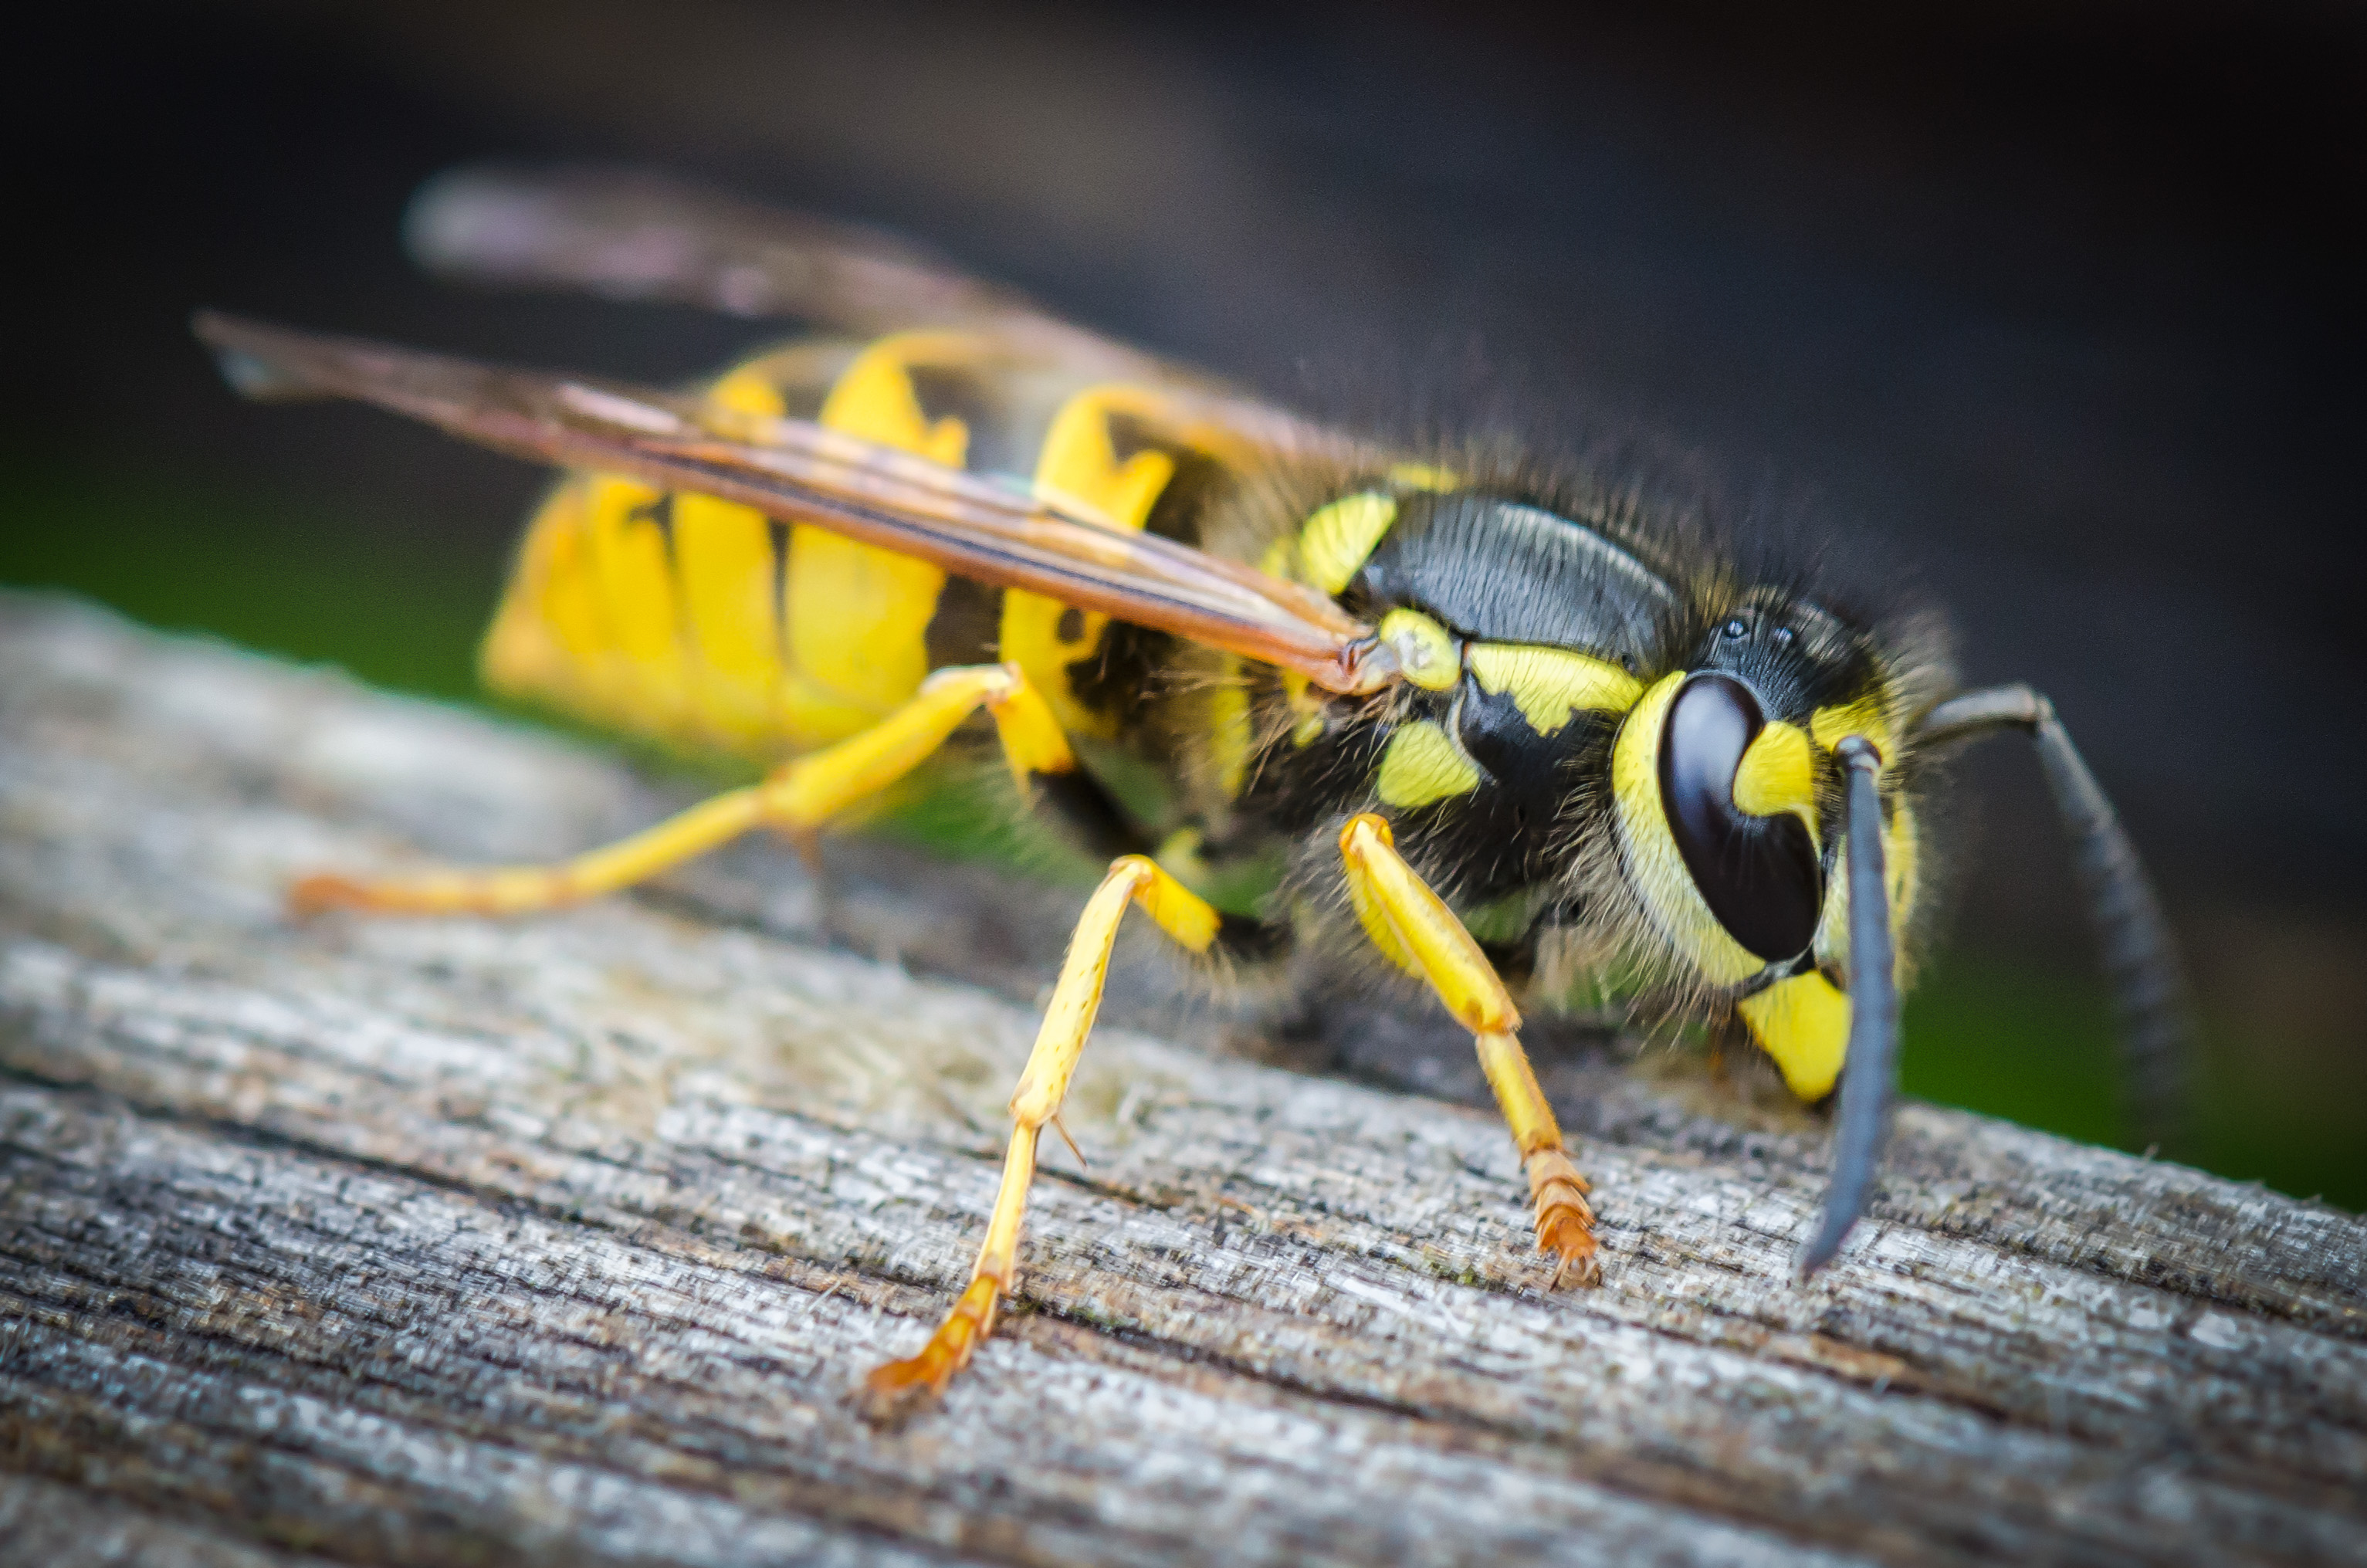 Wasps get into stinging confrontations with us when the queen stops laying  and food runs short - Cambridge Day